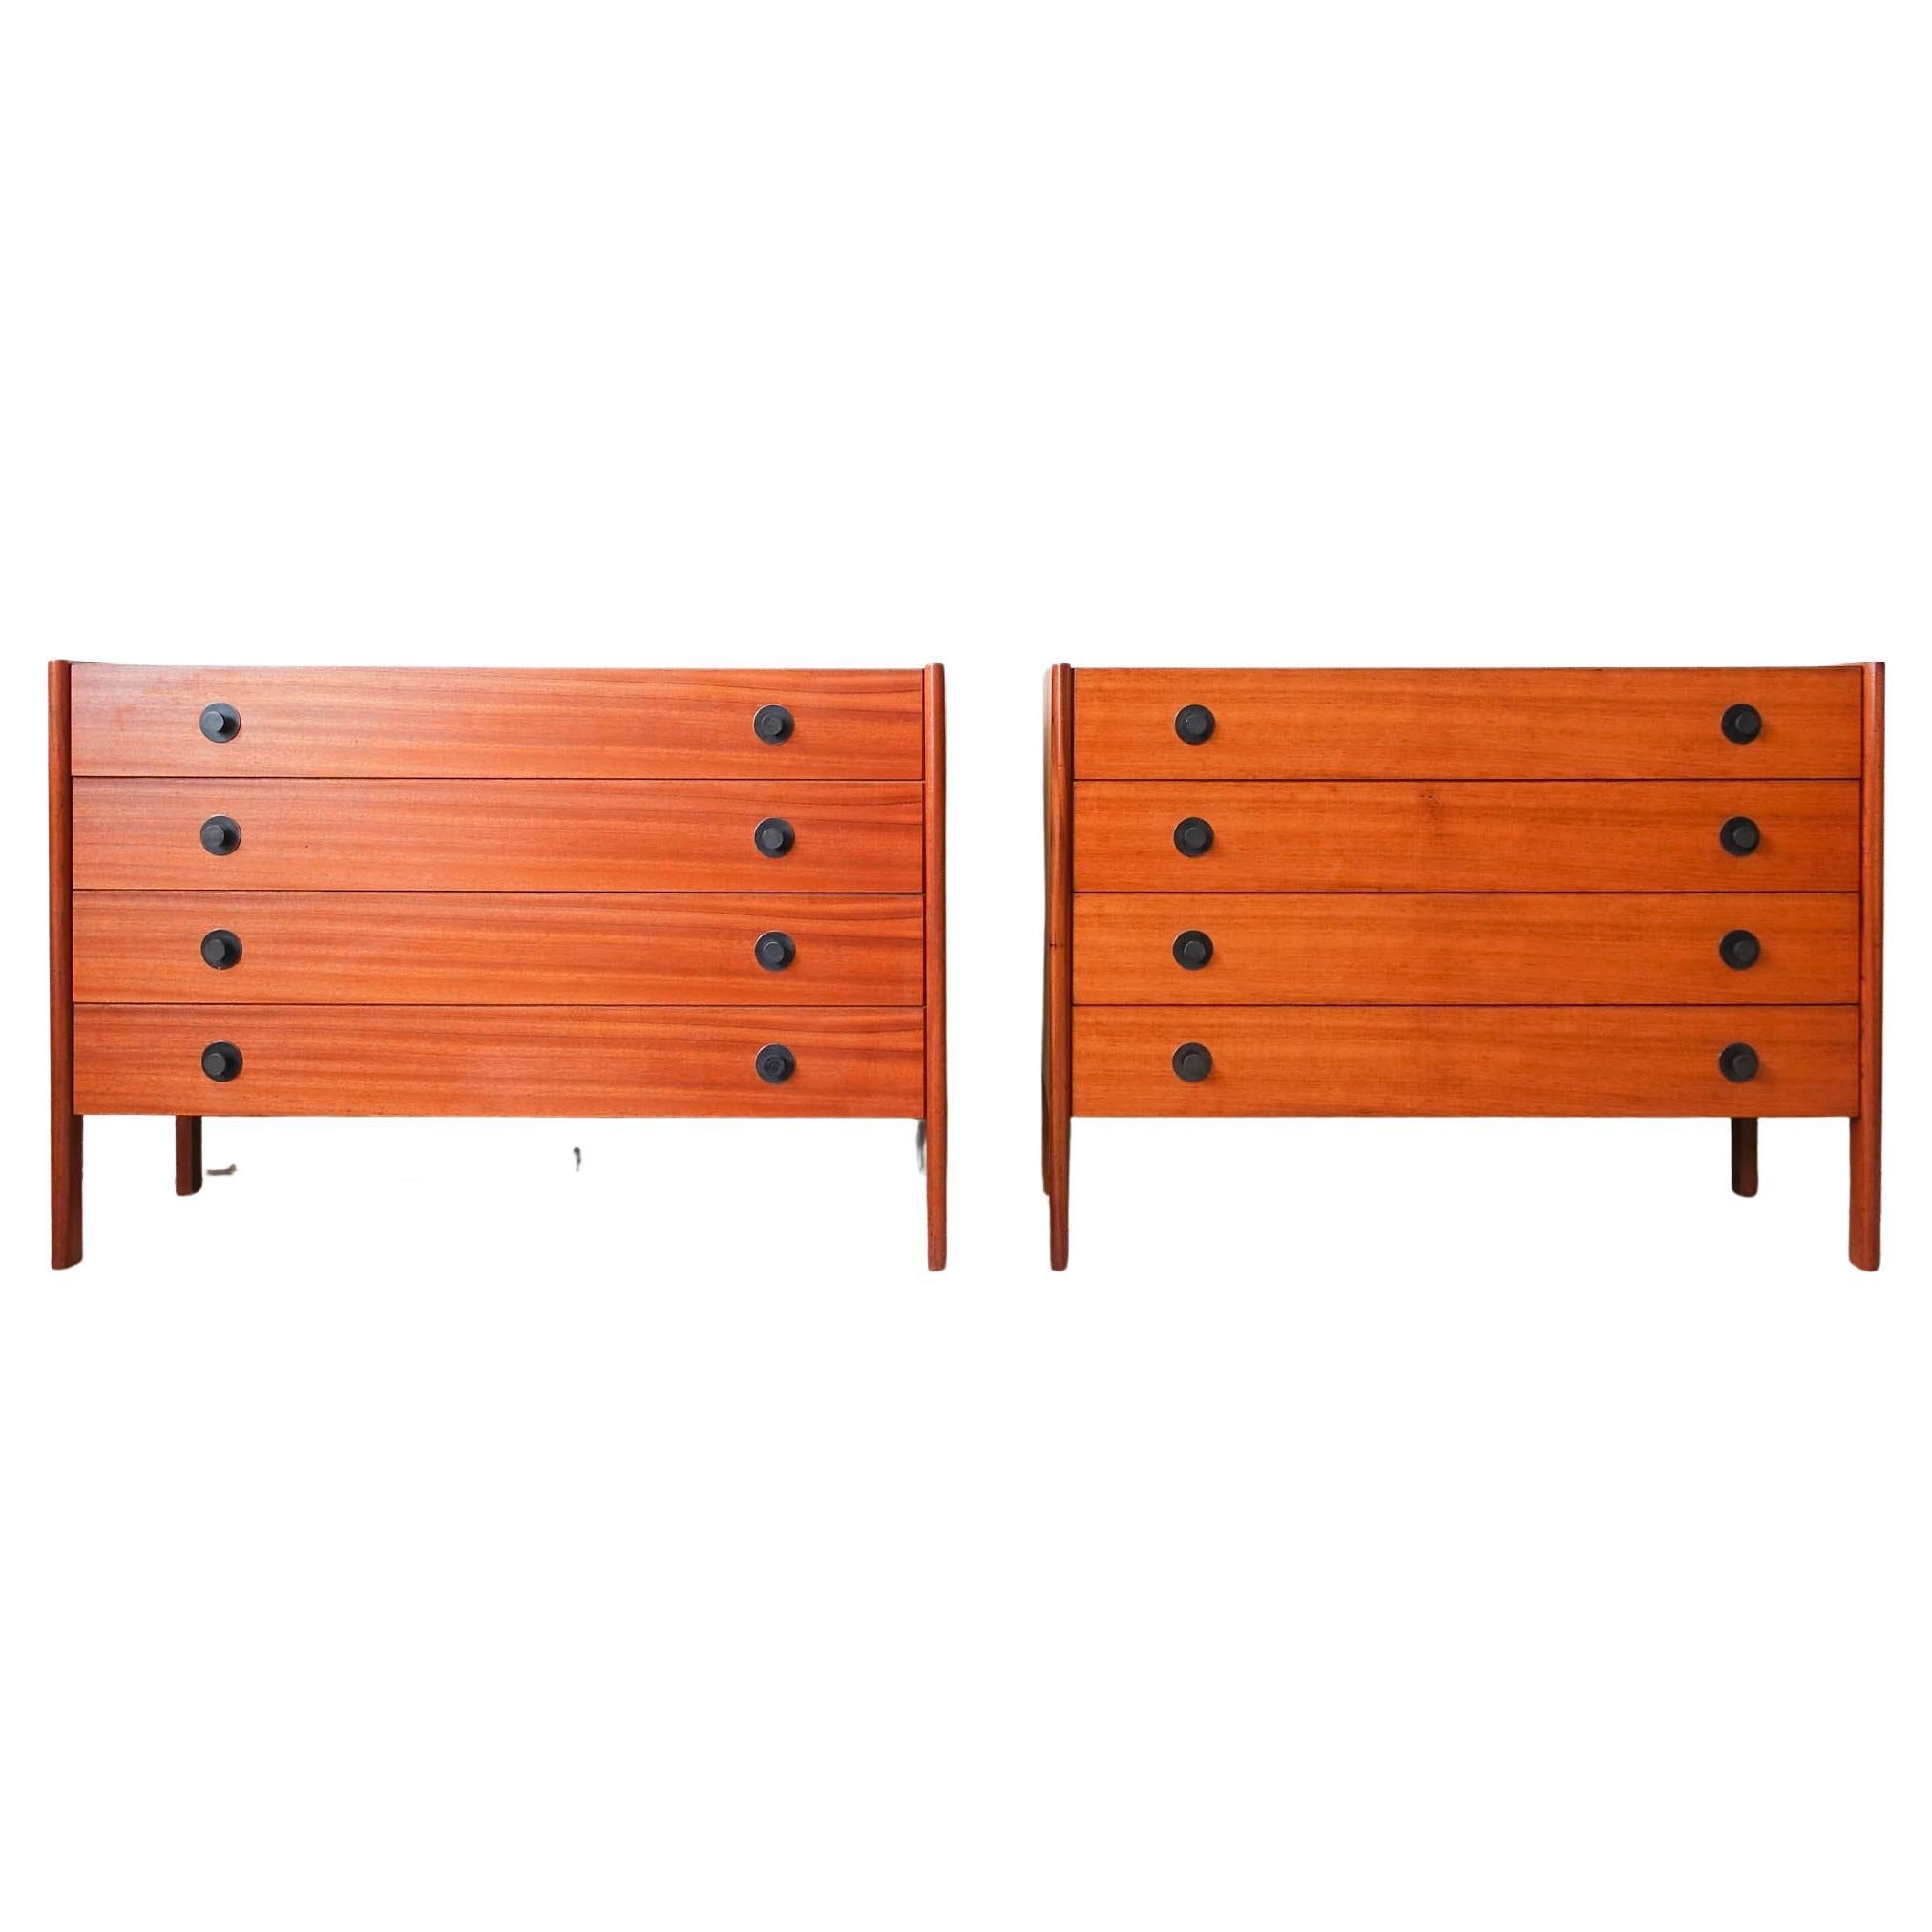 Pair of Vintage Chest of Drawers from José Espinho for Olaio, 1970's